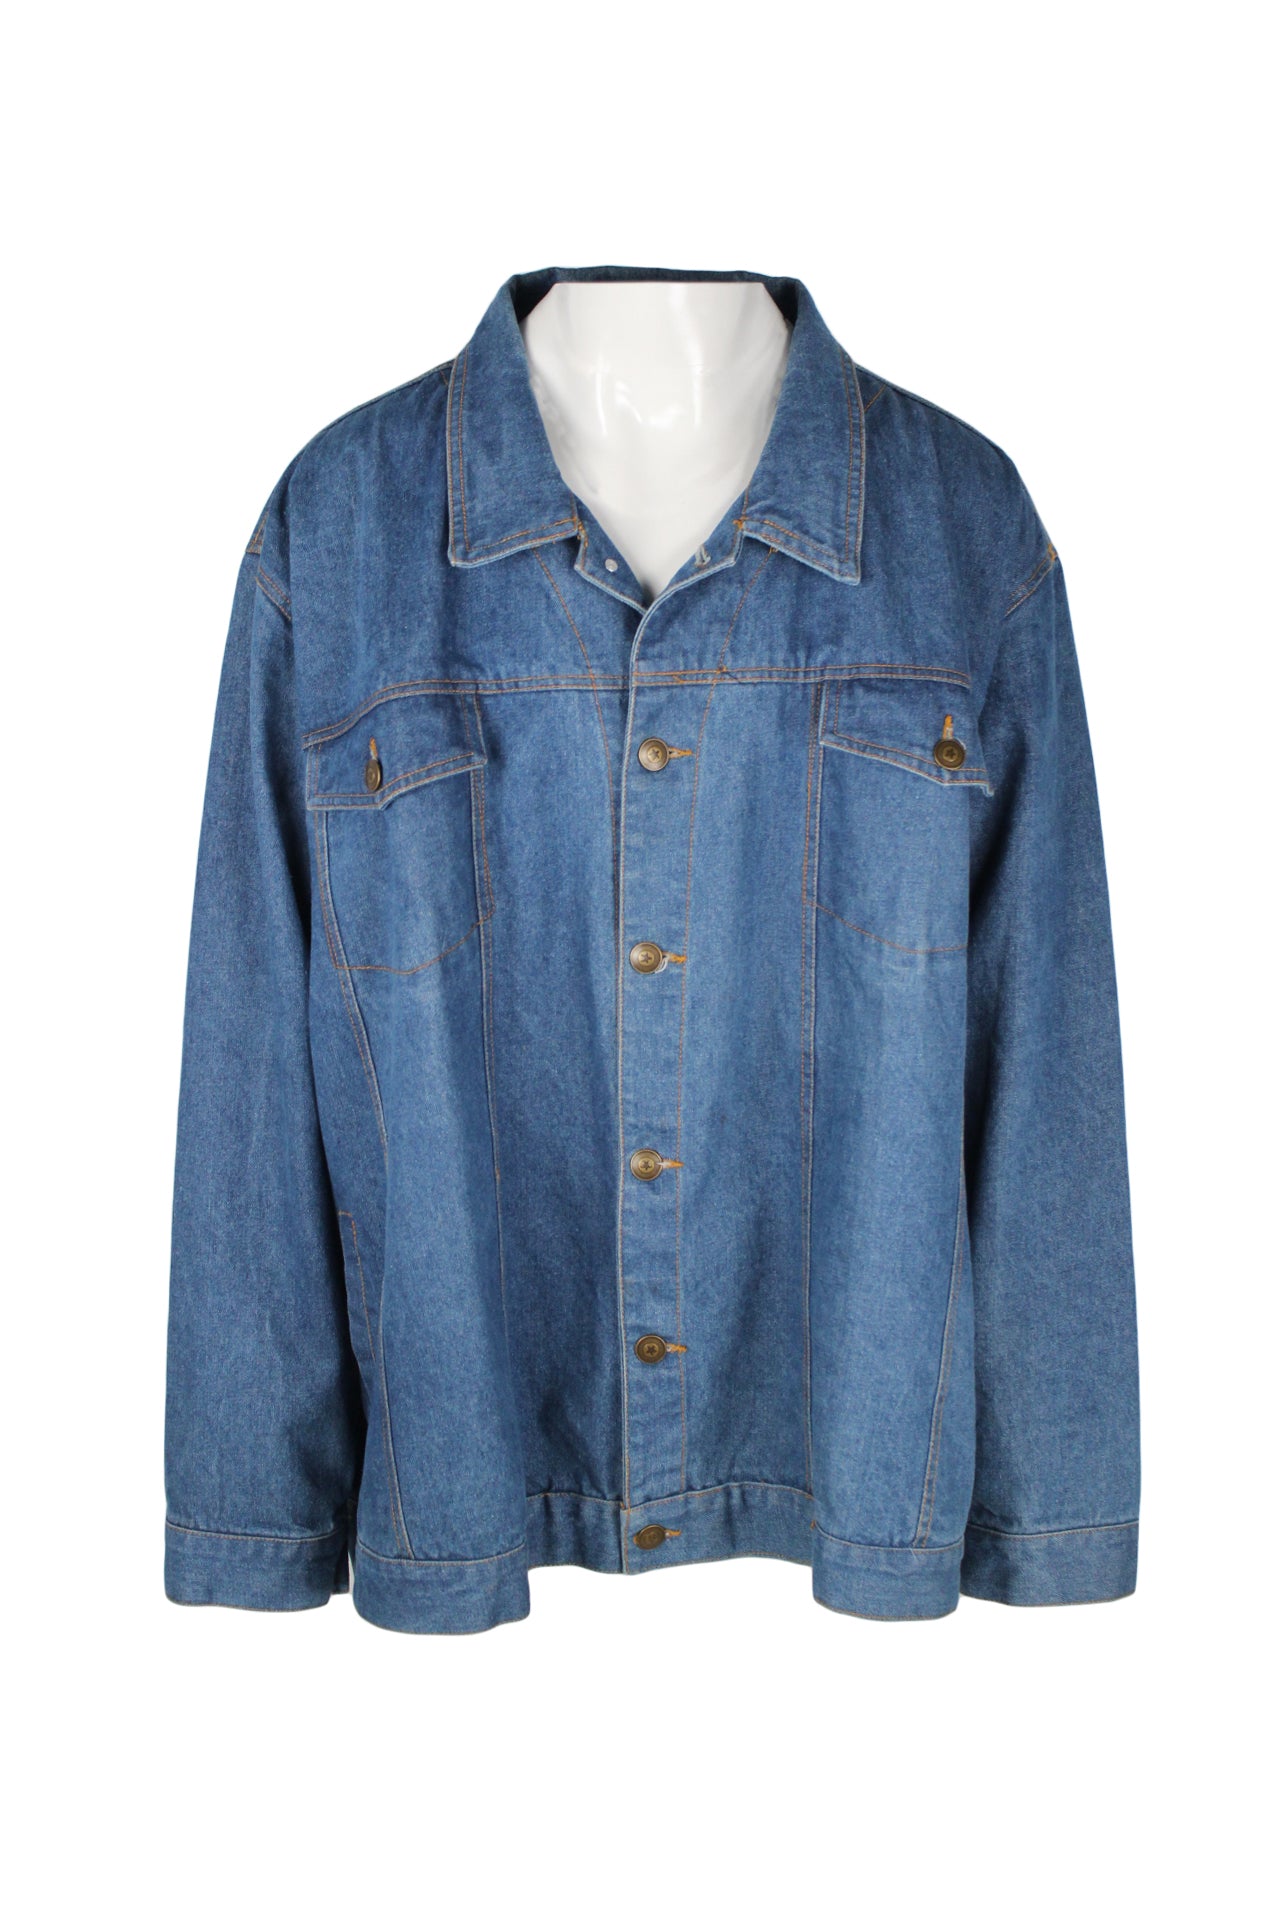 front angle of vintage duke haband blue denim jacket on masc mannequin. features brass toned button closure down center, buttoned breast pockets, pointed collar, side slit pockets, and orange topstitching. 